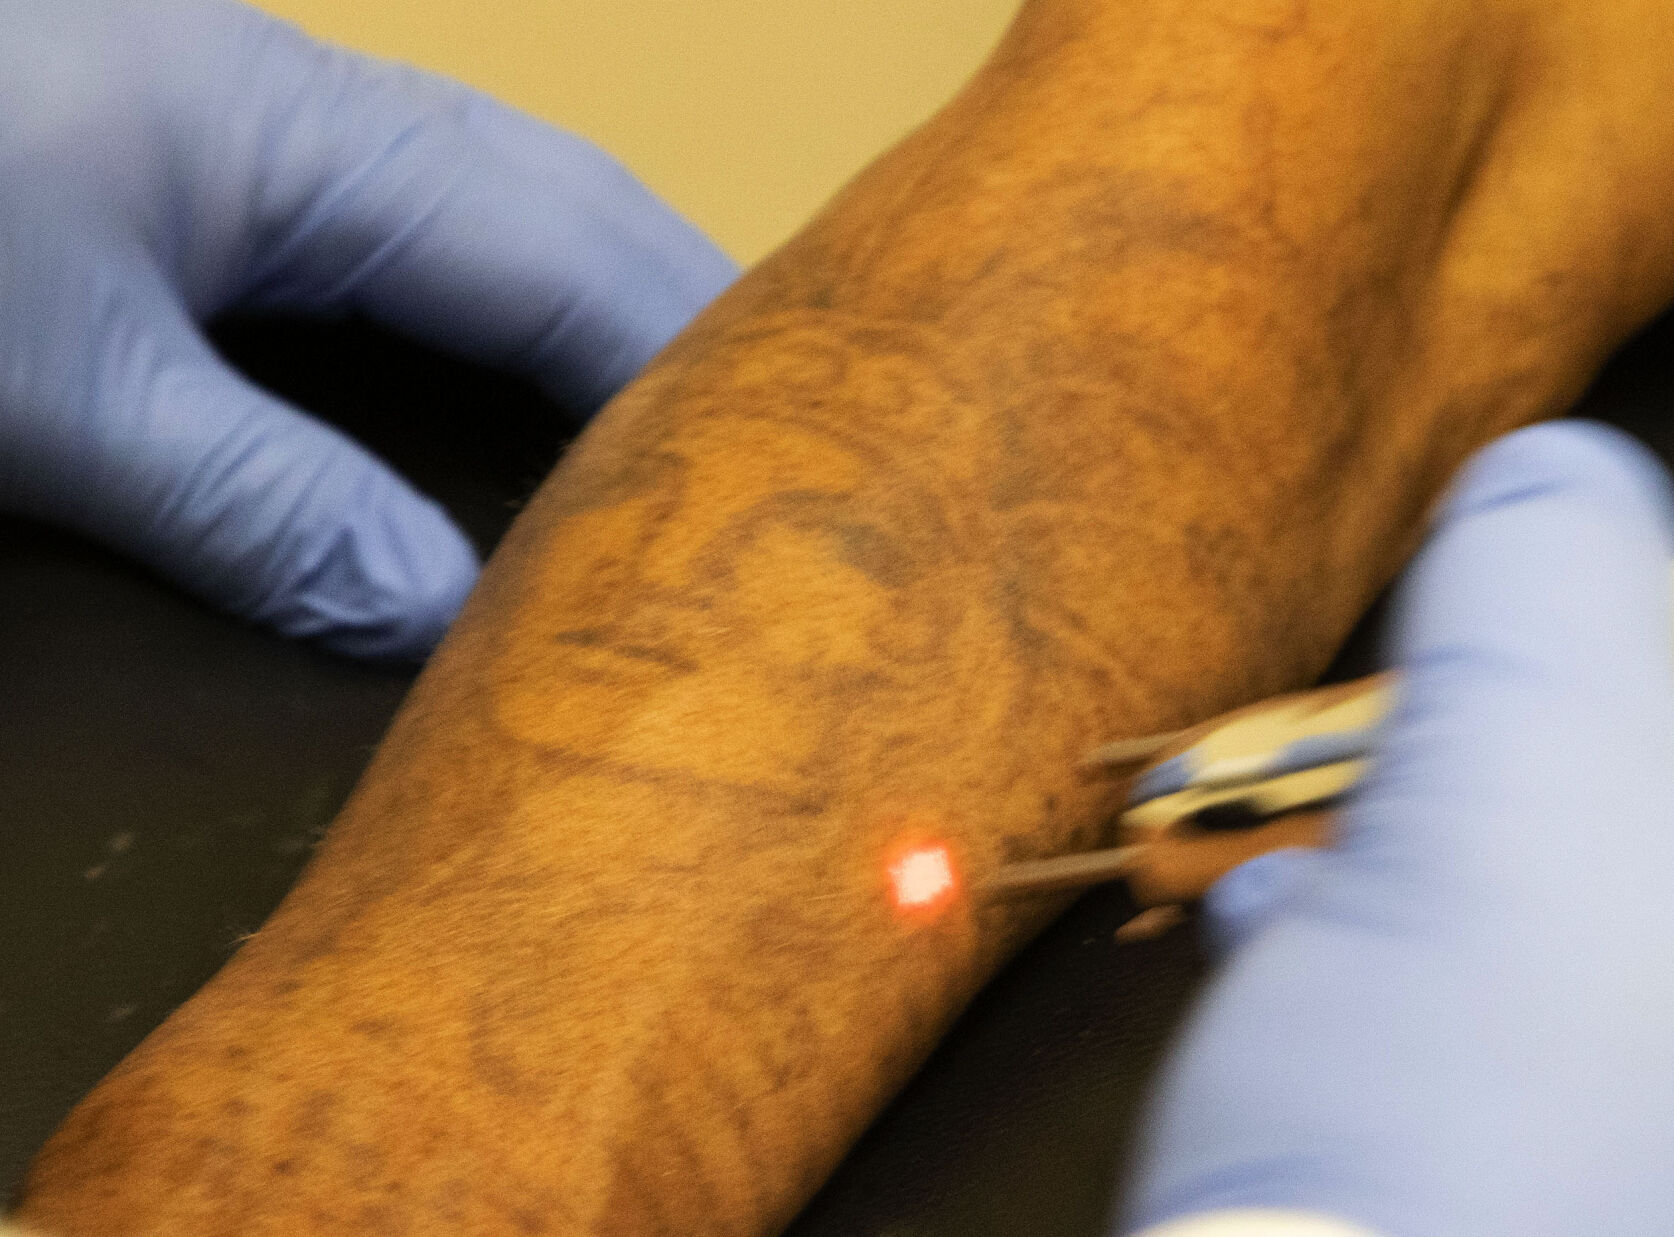 How Tattoo Removal Works  Silhouette Plastic Surgery Institute